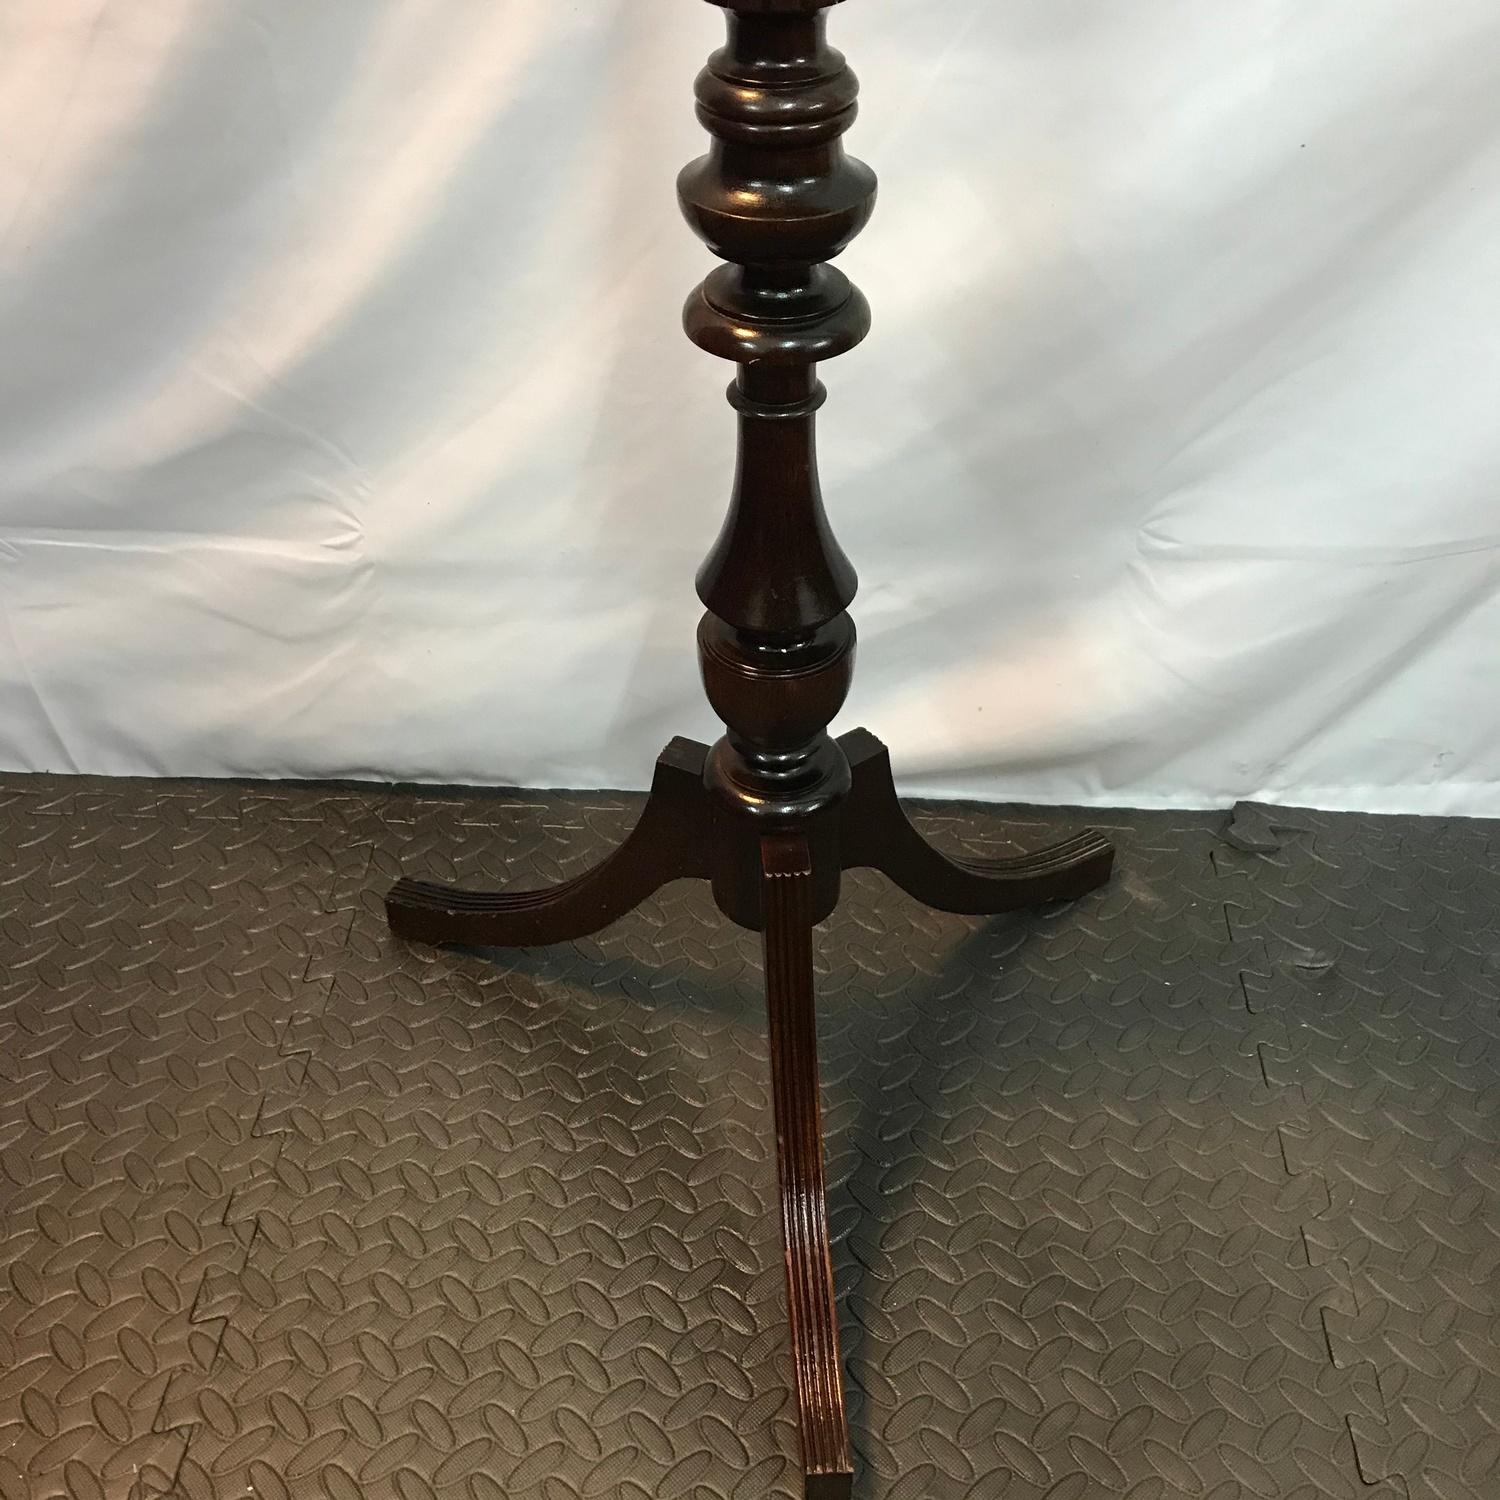 A Mahogany pedestal torcher stand. Supported on tri- legs. [96cm in height] - Image 2 of 3